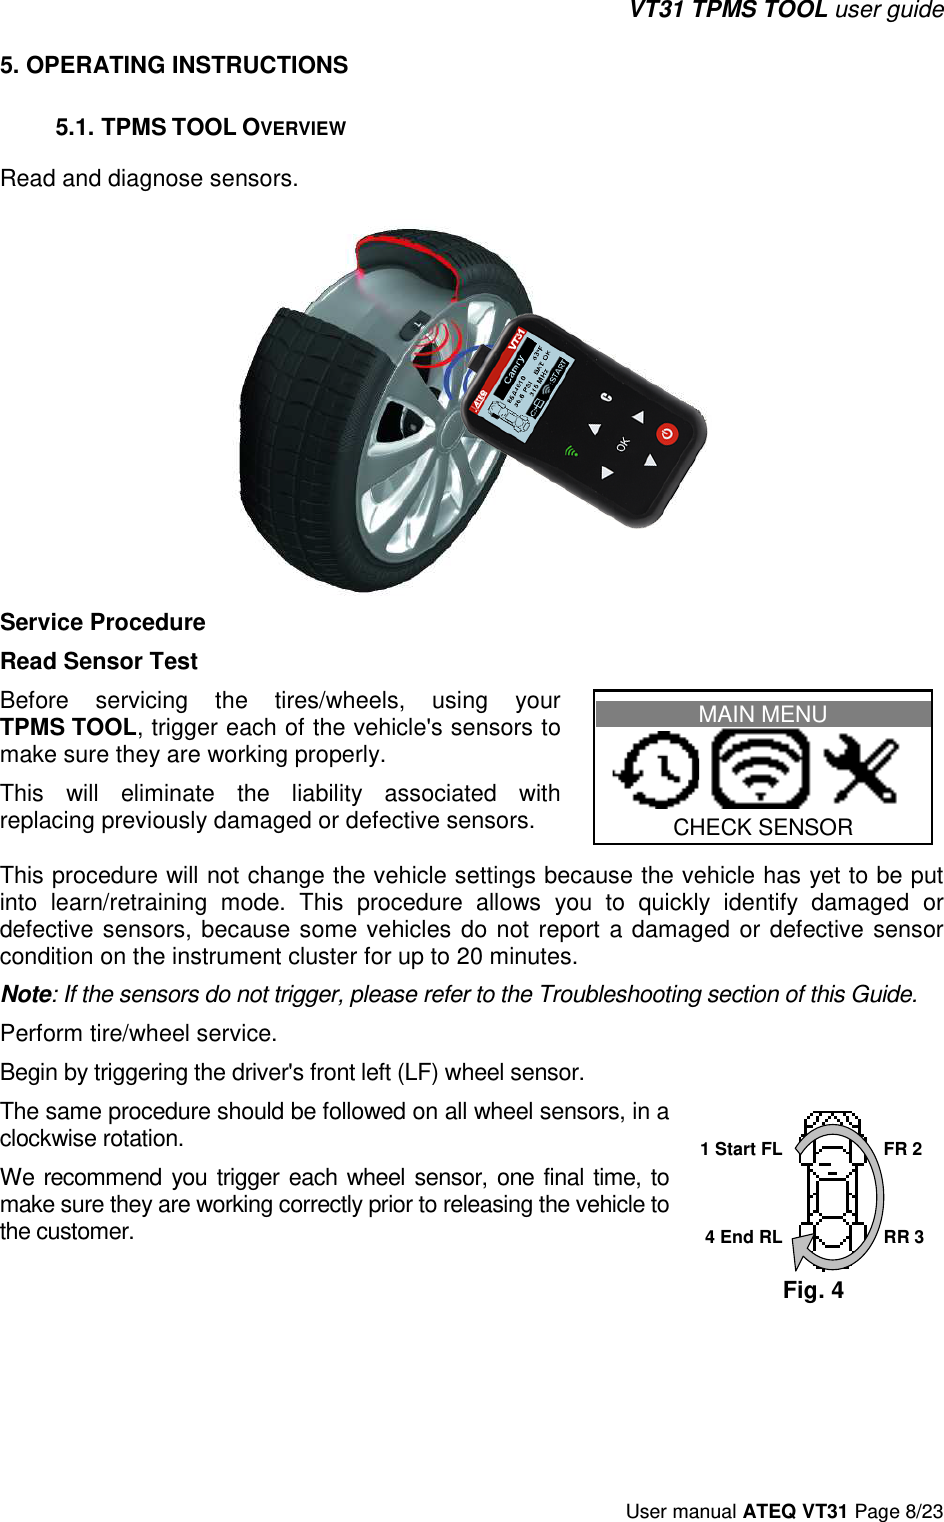 VT31 TPMS TOOL user guide User manual ATEQ VT31 Page 8/23 5. OPERATING INSTRUCTIONS5.1. TPMS TOOL OVERVIEW Read and diagnose sensors. Service Procedure Read Sensor Test Before  servicing  the  tires/wheels,  using  your TPMS TOOL, trigger each of the vehicle&apos;s sensors to make sure they are working properly.  This  will  eliminate  the  liability  associated  with replacing previously damaged or defective sensors. MAIN MENU     CHECK SENSOR This procedure will not change the vehicle settings because the vehicle has yet to be put into  learn/retraining  mode.  This  procedure  allows  you  to  quickly  identify  damaged  or defective sensors,  because  some  vehicles  do  not  report  a  damaged  or  defective  sensor condition on the instrument cluster for up to 20 minutes. Note: If the sensors do not trigger, please refer to the Troubleshooting section of this Guide. Perform tire/wheel service.  Begin by triggering the driver&apos;s front left (LF) wheel sensor. The same procedure should be followed on all wheel sensors, in a clockwise rotation.  We  recommend you  trigger  each  wheel  sensor,  one  final time,  to make sure they are working correctly prior to releasing the vehicle to the customer. 1 Start FL 4 End RL FR 2 RR 3 Fig. 4 